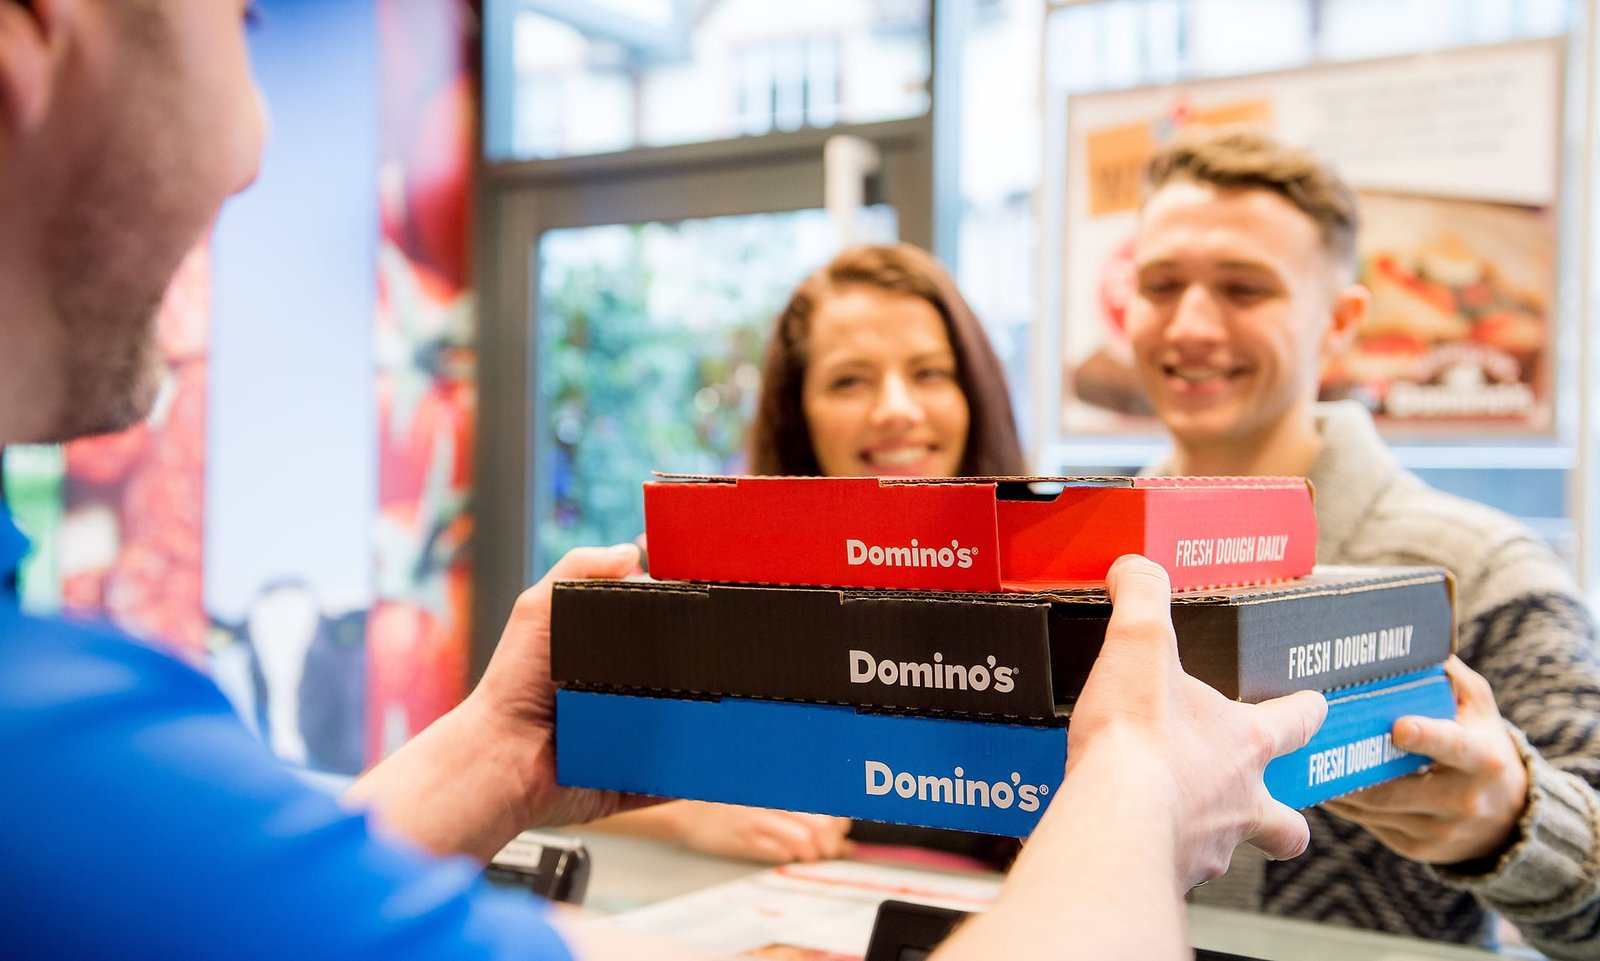 Domino’s hires Emily Somer former McDonald’s marketer as its first CMO